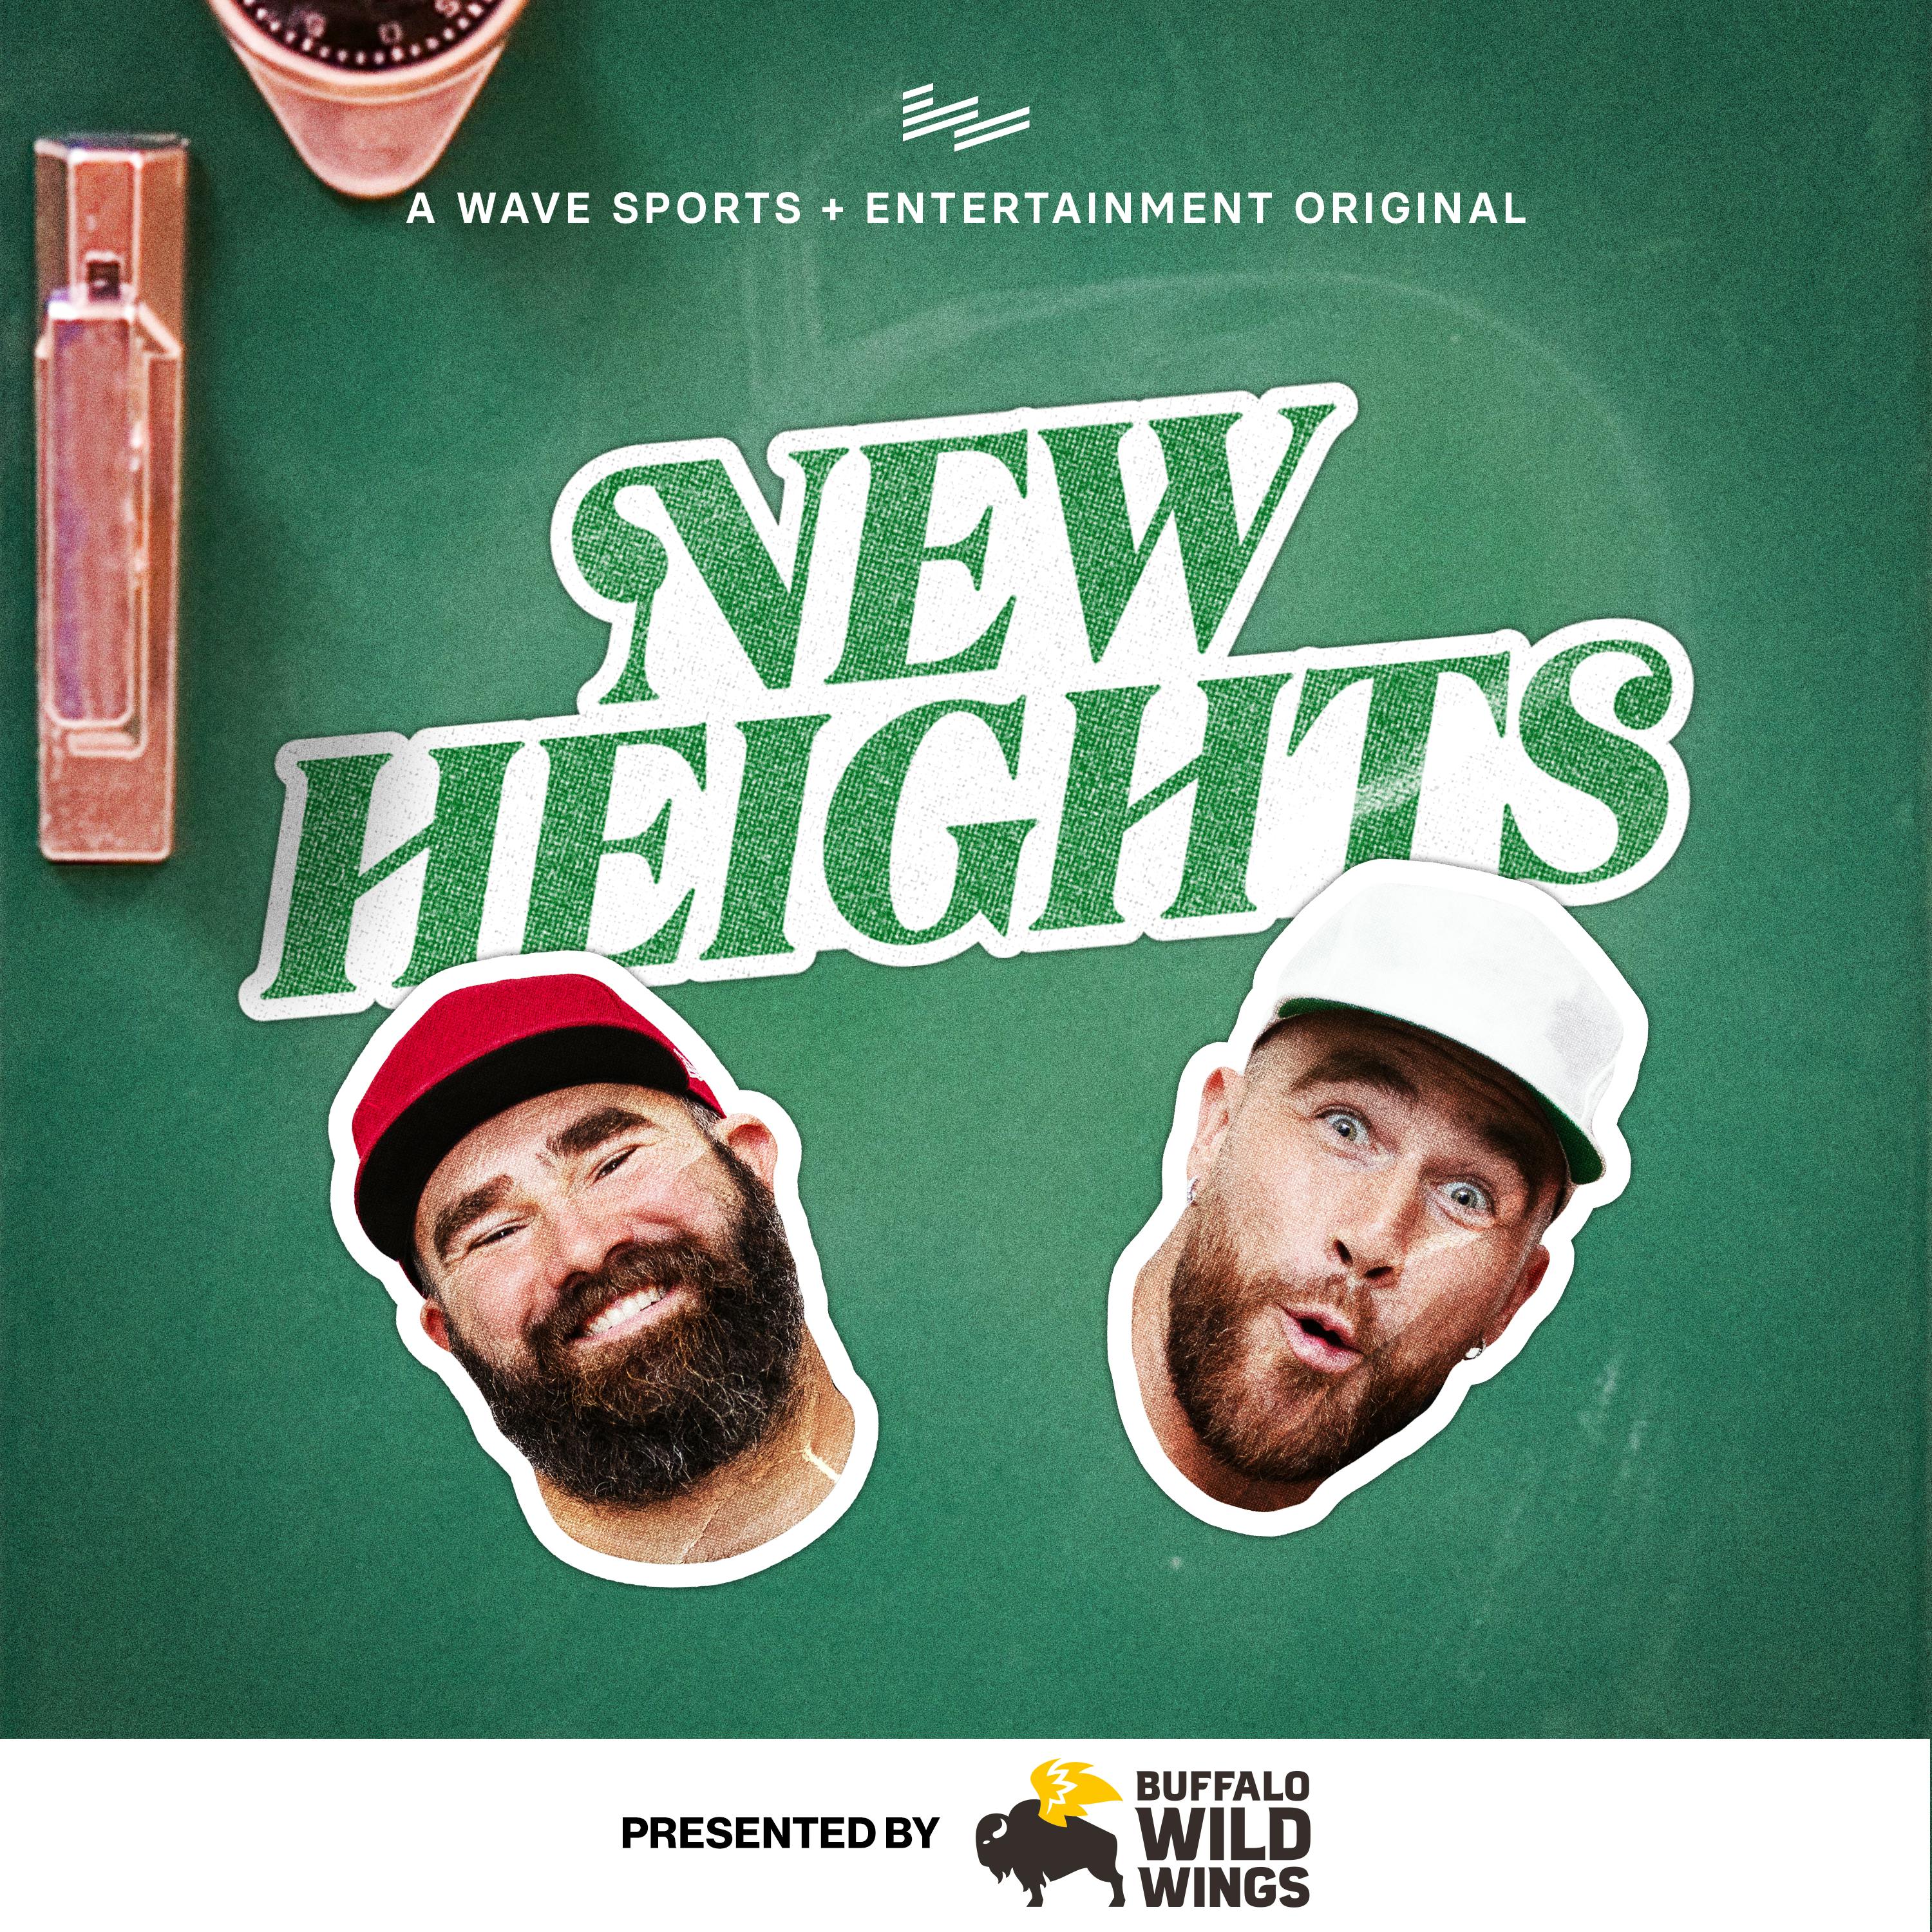 New Heights with Jason and Travis Kelce by Wave Sports + Entertainment